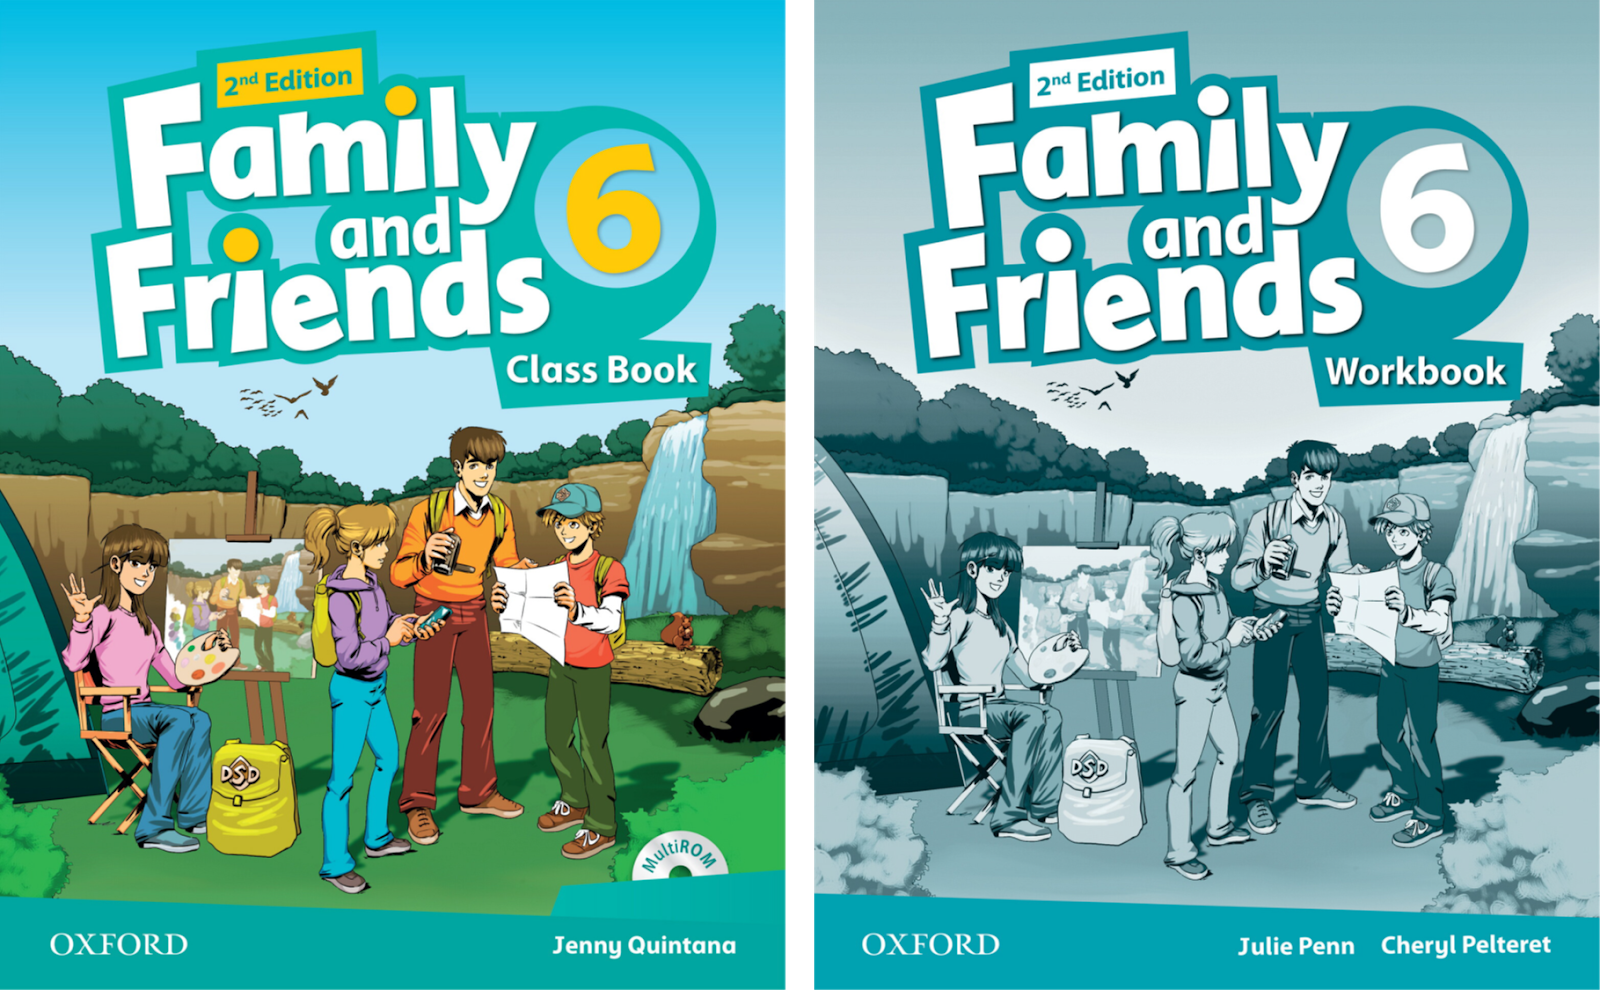 Family and friends students. Family and friends 2 первое издание. Family and friends 2 2nd Edition Classbook. \Фэмили энд френдс 2 издание. Family and friends 6 class book.